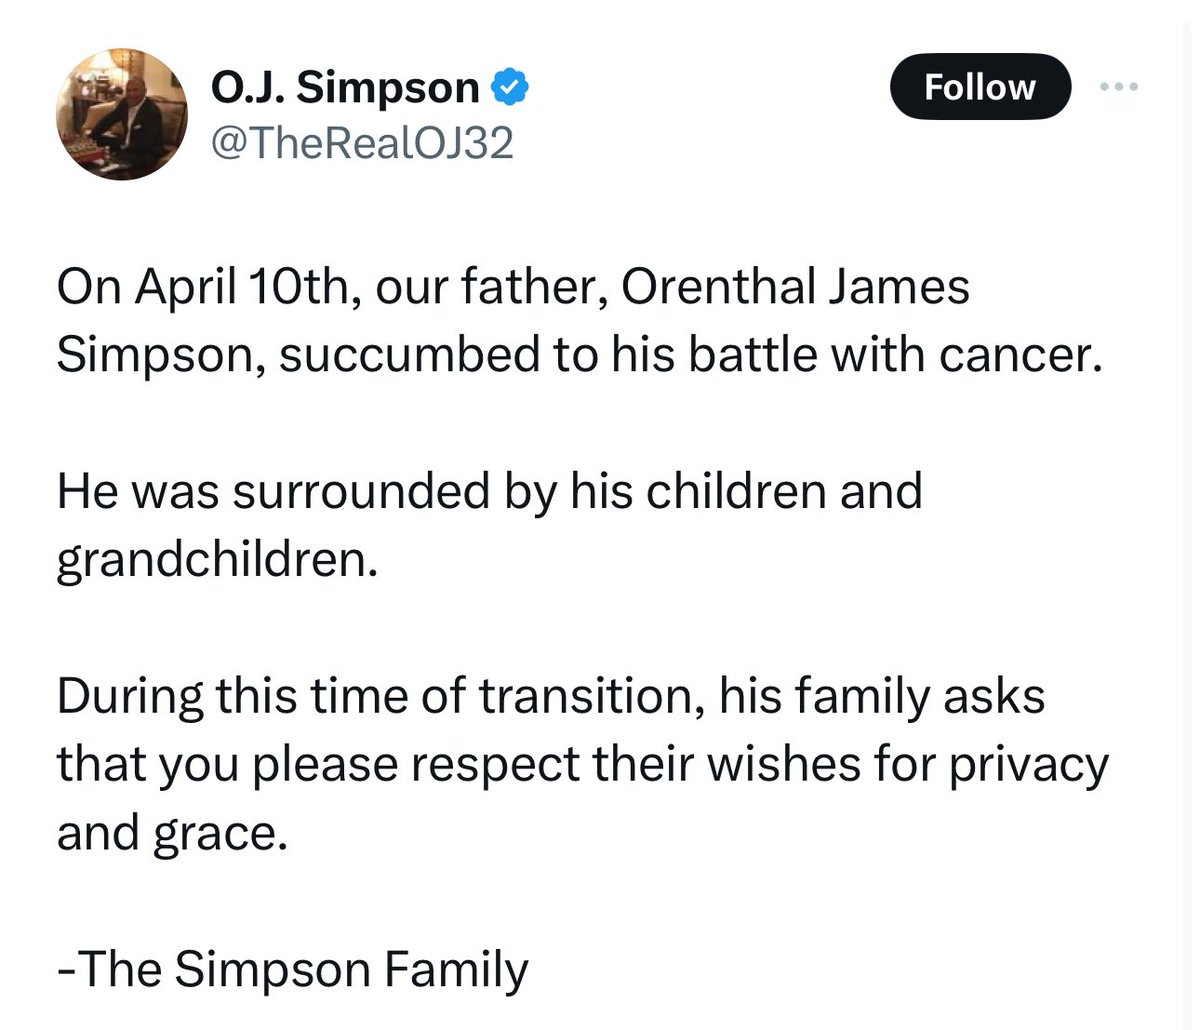 O.J. Simpson has passed away at the age of 76.